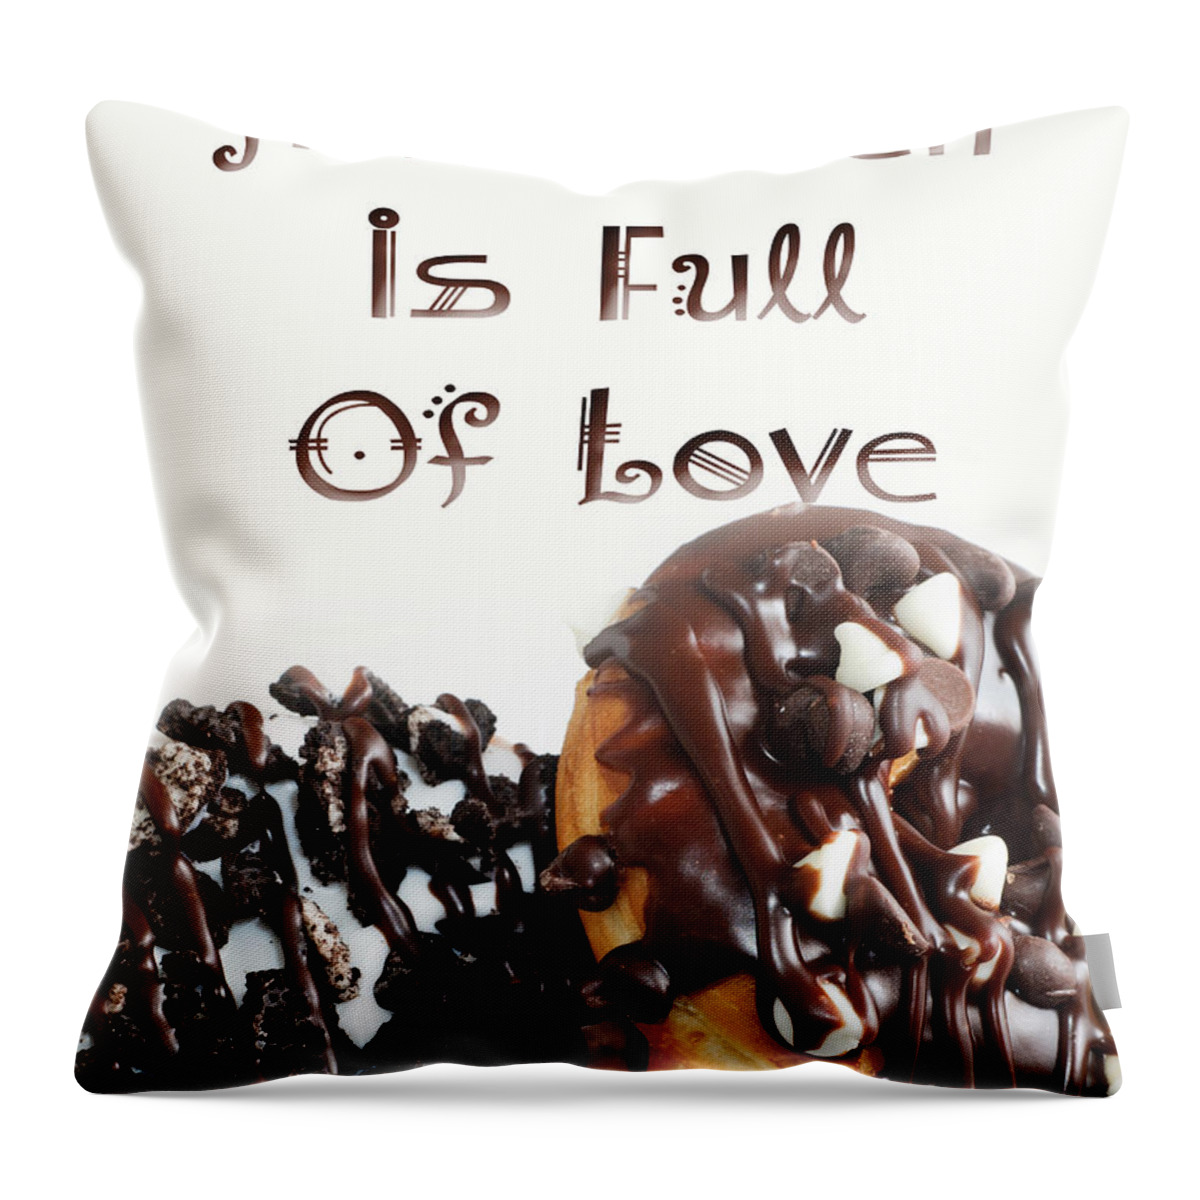 Donuts Throw Pillow featuring the digital art A Kitchen Is Full Of Love 7 by Andee Design